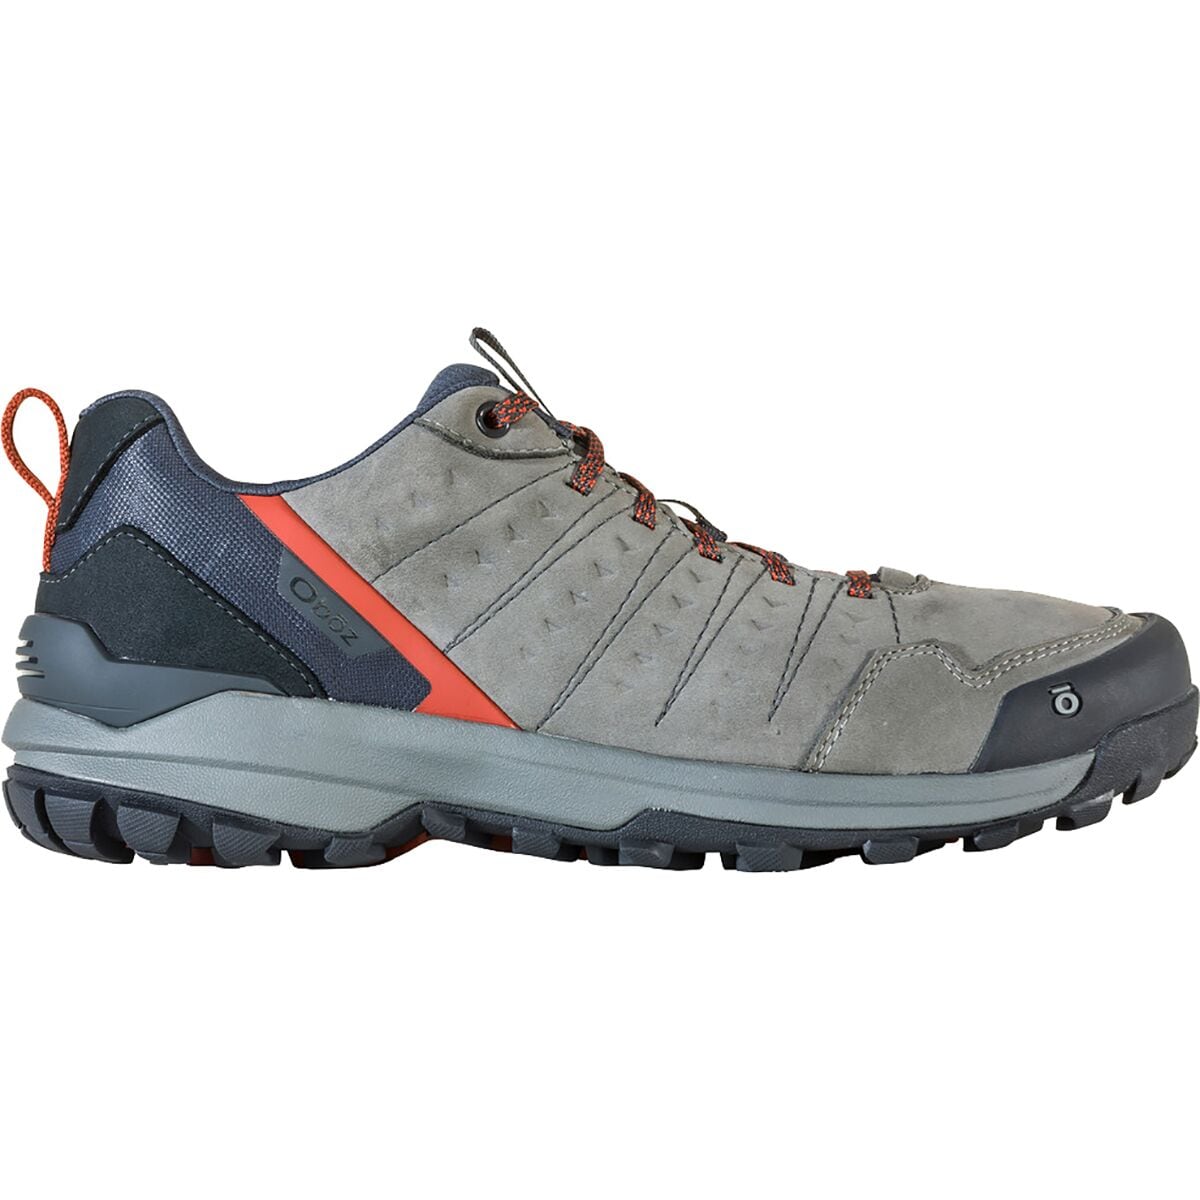 Oboz Sypes Low Leather B-DRY Hiking Shoe - Men's